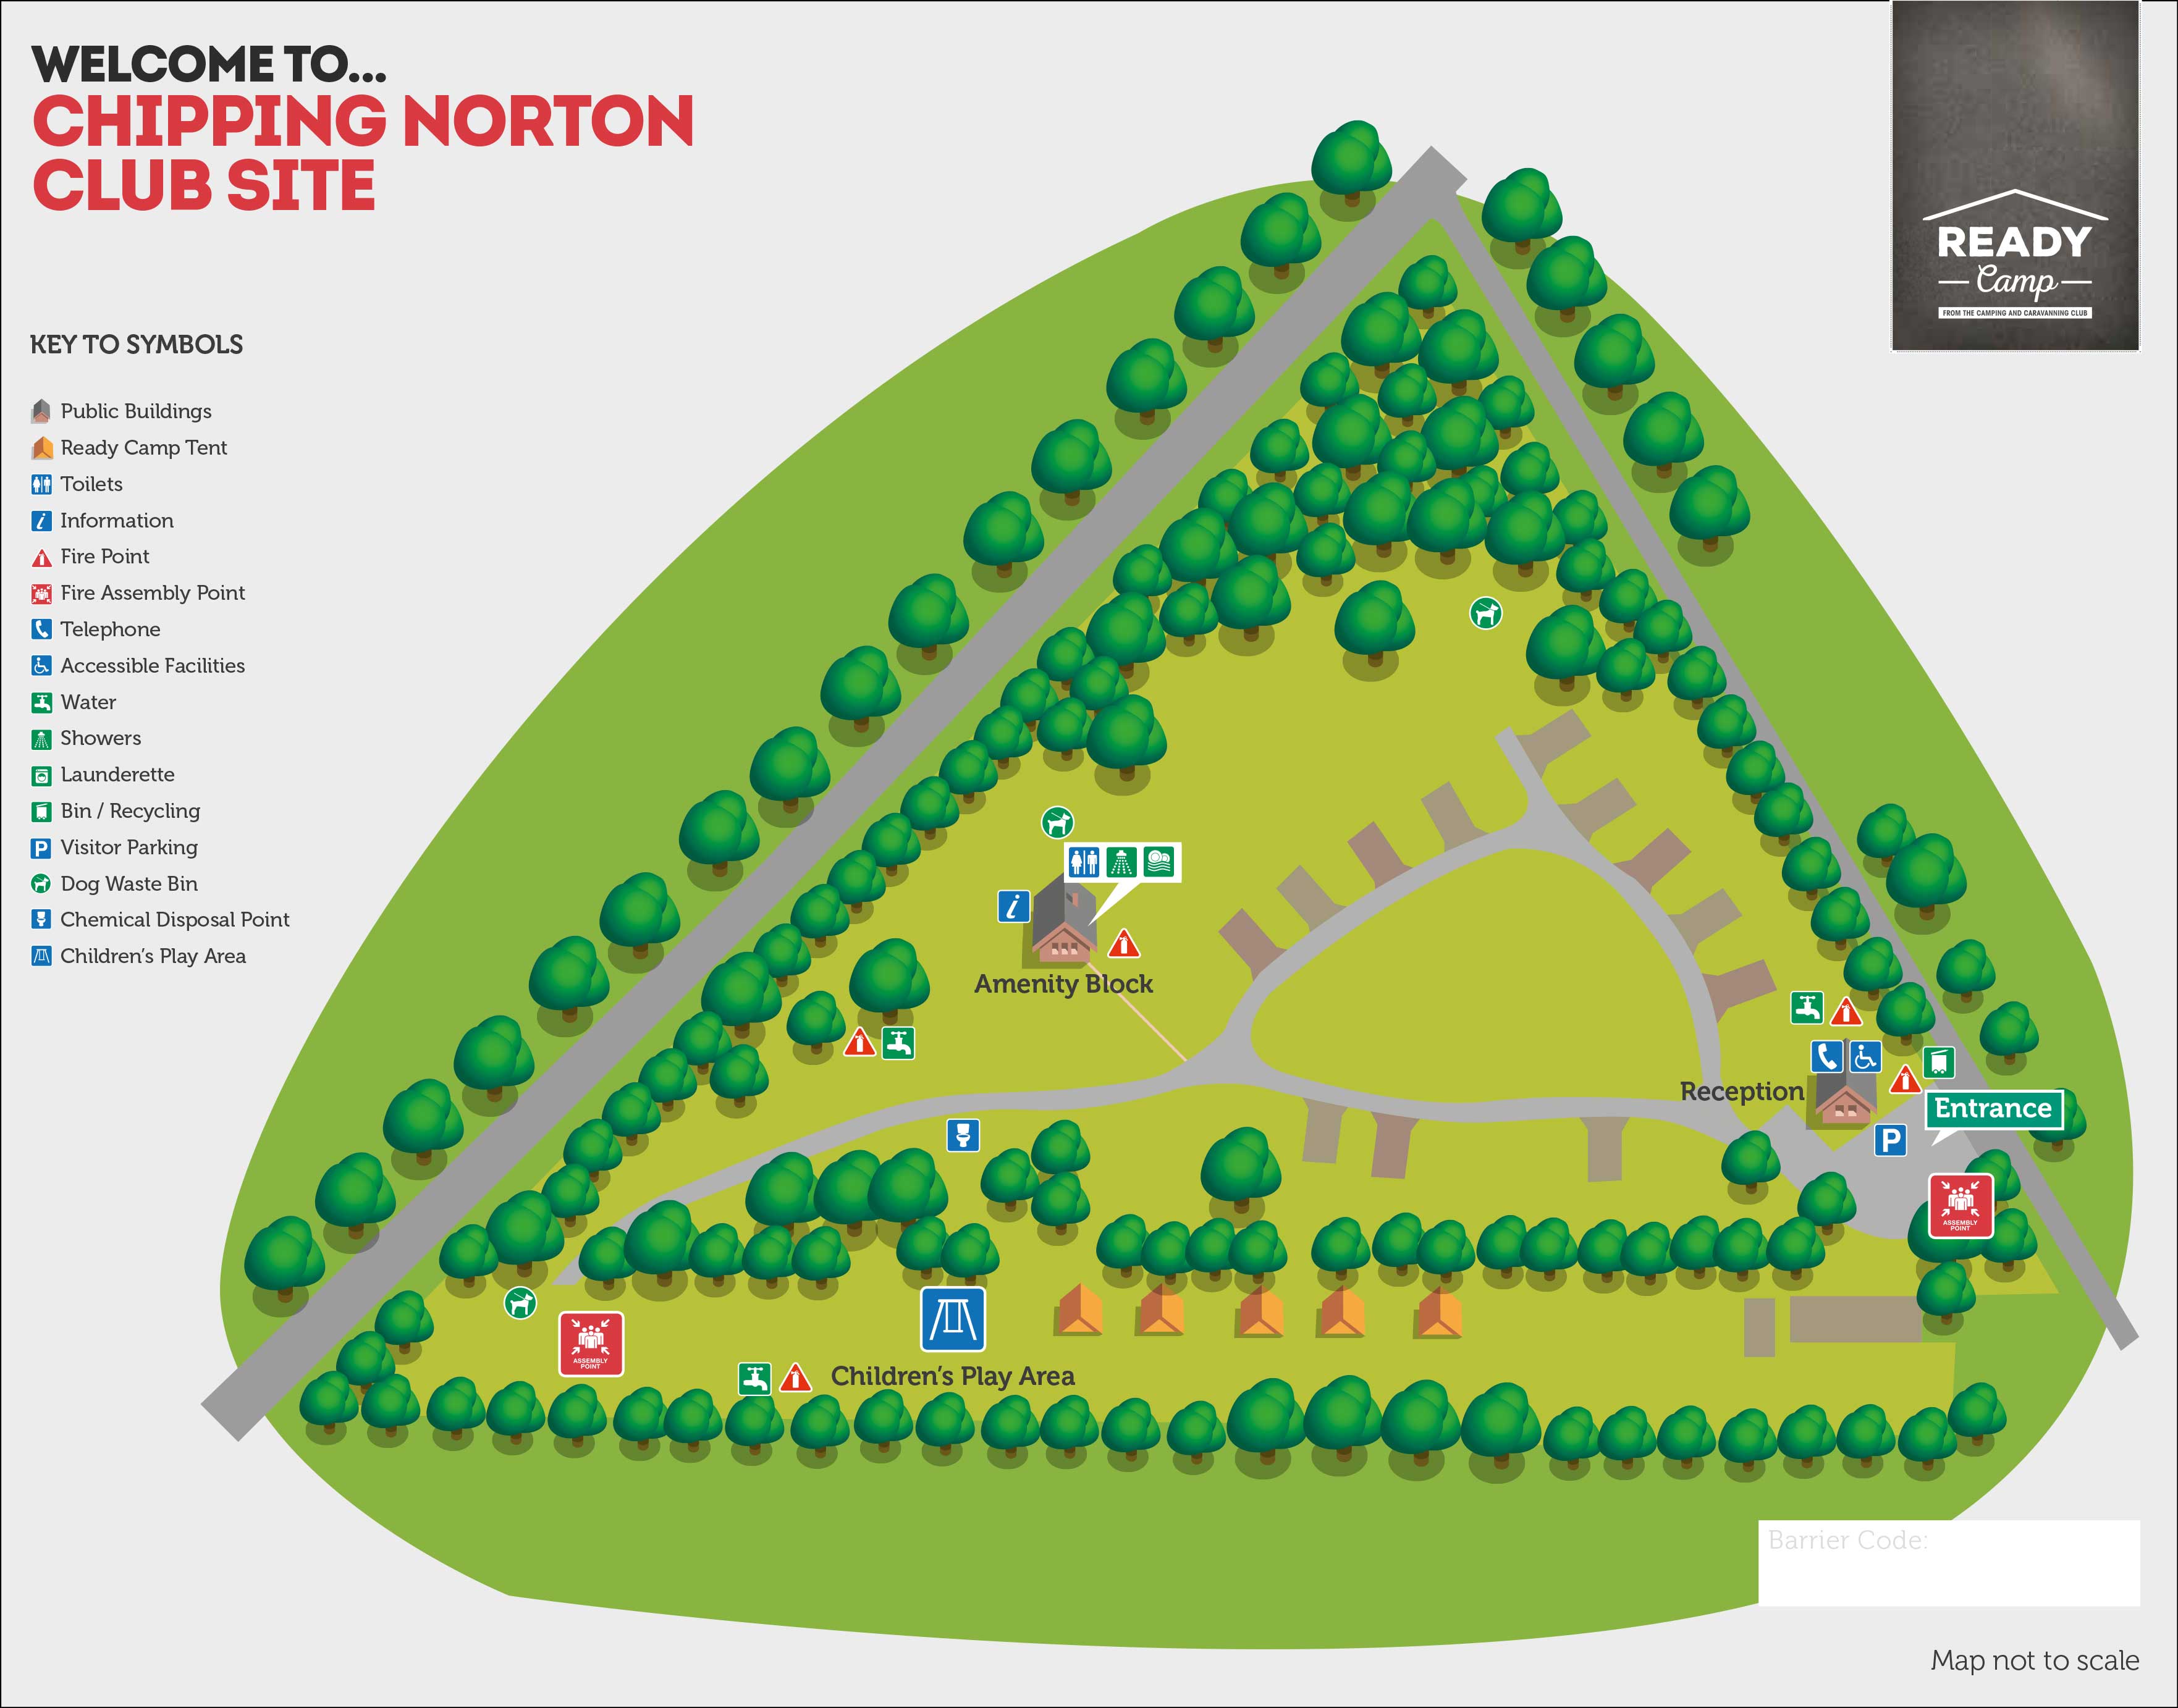 Chipping Norton Campsite - Camping and Caravanning Club Site